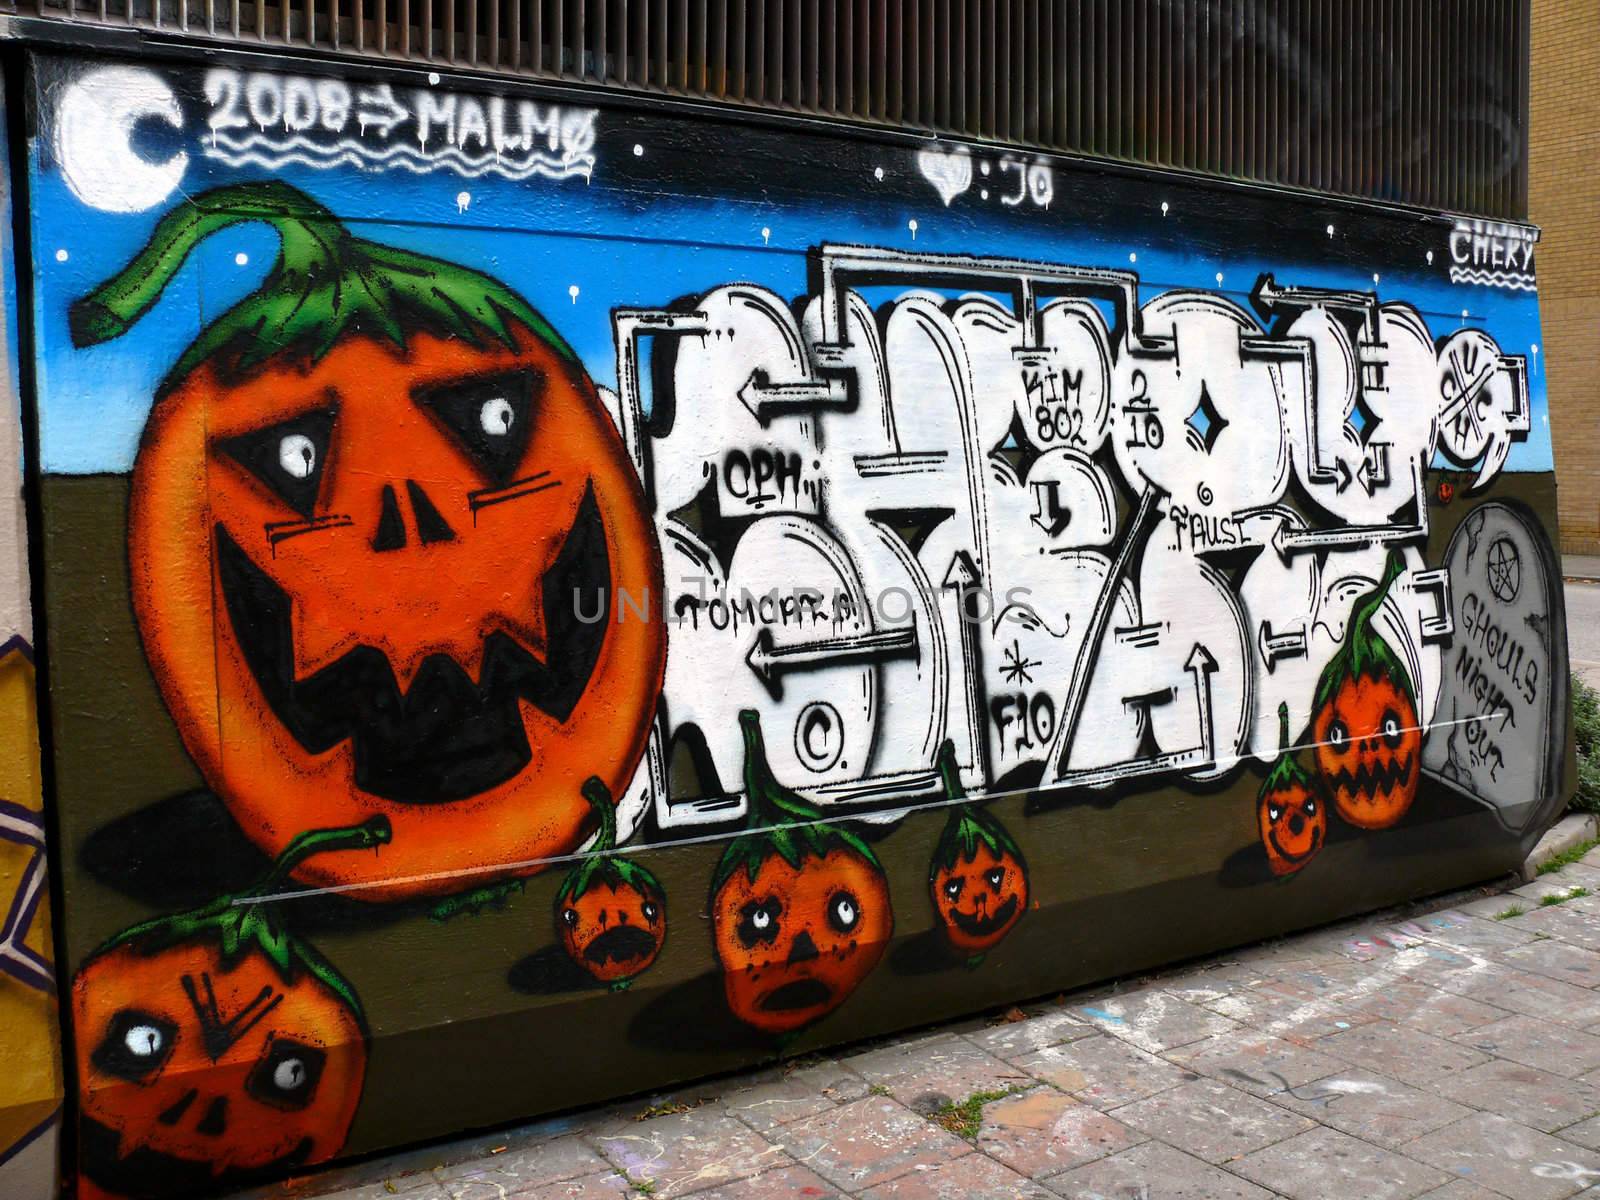 portrait of a halloween painted graffiti wall background 